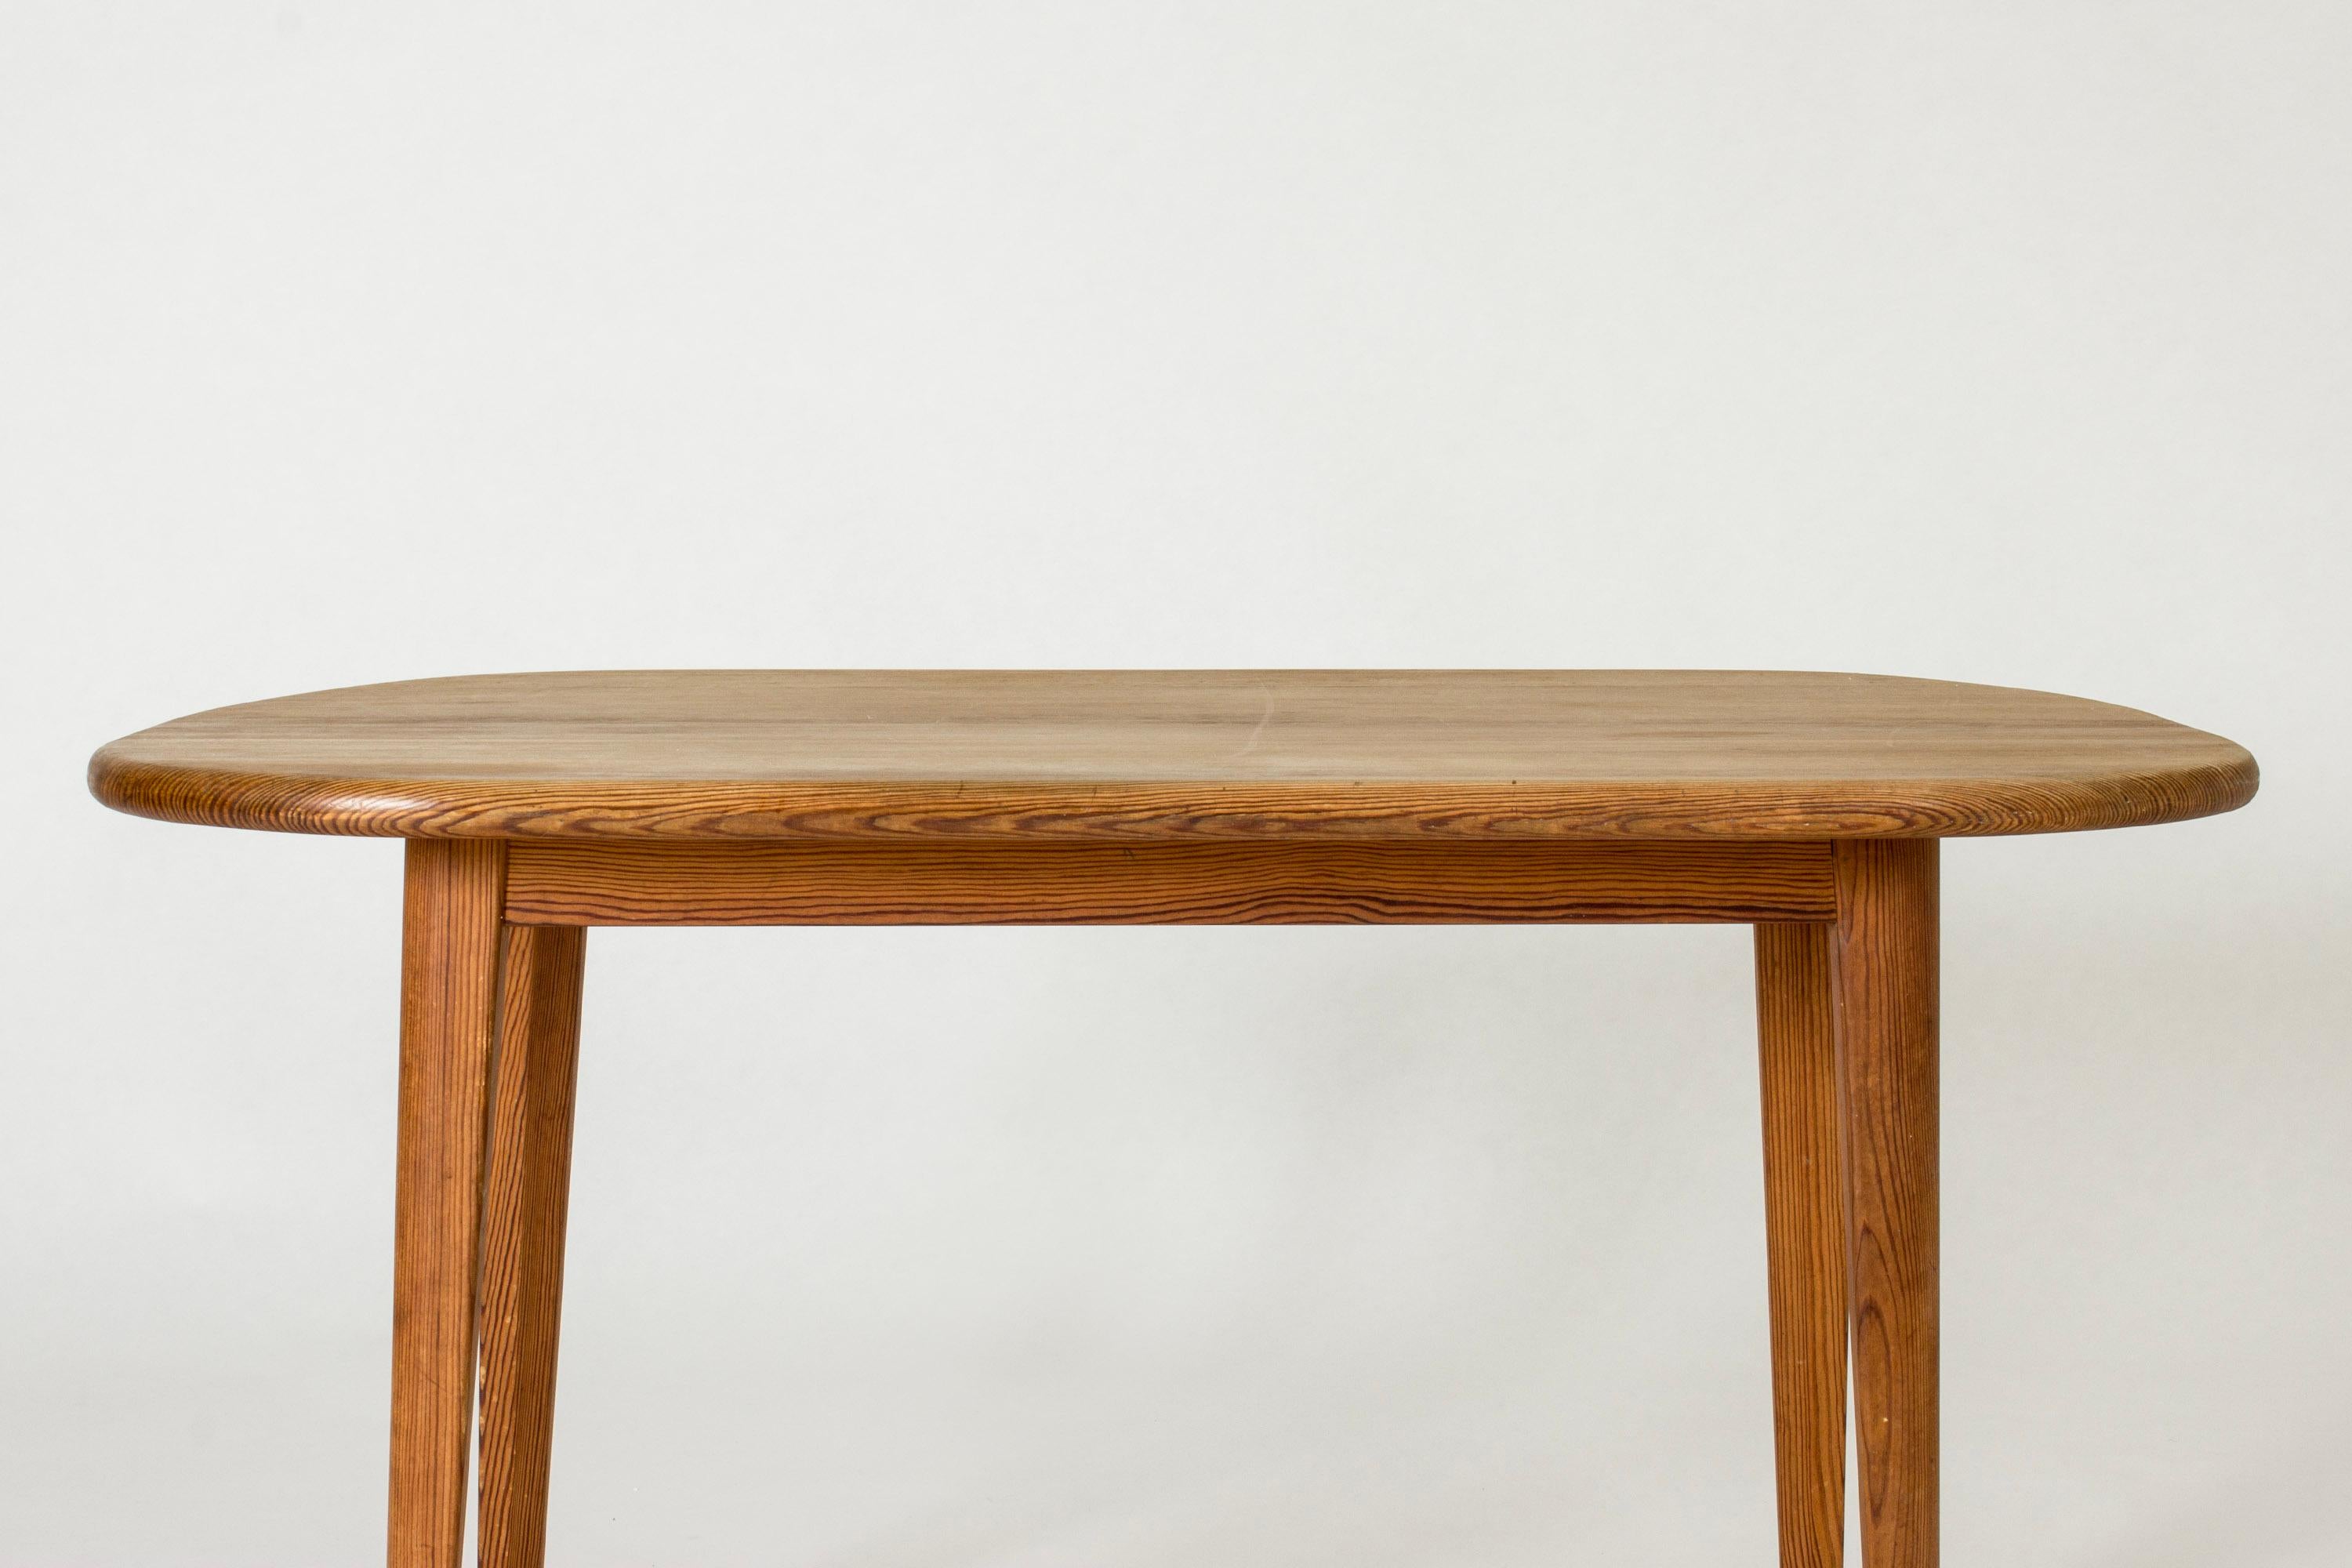 Scandinavian Modern Midcentury Pine Occasional Table by Carl Malmsten, Sweden, 1940s For Sale